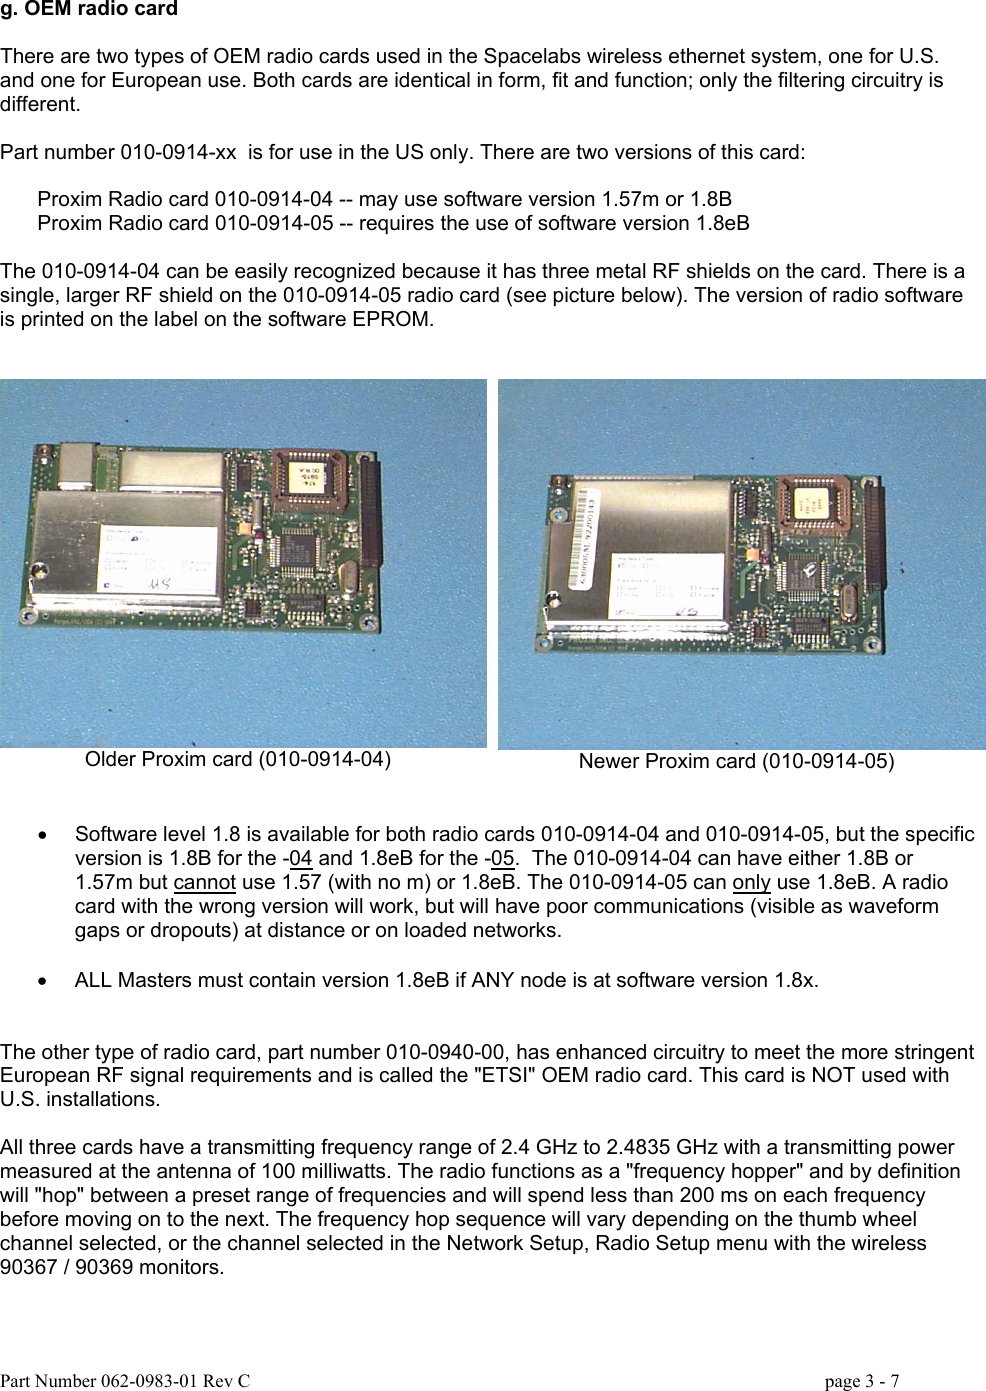 g. OEM radio card  There are two types of OEM radio cards used in the Spacelabs wireless ethernet system, one for U.S. and one for European use. Both cards are identical in form, fit and function; only the filtering circuitry is different.  Part number 010-0914-xx  is for use in the US only. There are two versions of this card:  Proxim Radio card 010-0914-04 -- may use software version 1.57m or 1.8B Proxim Radio card 010-0914-05 -- requires the use of software version 1.8eB  The 010-0914-04 can be easily recognized because it has three metal RF shields on the card. There is a single, larger RF shield on the 010-0914-05 radio card (see picture below). The version of radio software is printed on the label on the software EPROM.   Older Proxim card (010-0914-04)  Newer Proxim card (010-0914-05)   •  Software level 1.8 is available for both radio cards 010-0914-04 and 010-0914-05, but the specific version is 1.8B for the -04 and 1.8eB for the -05.  The 010-0914-04 can have either 1.8B or 1.57m but cannot use 1.57 (with no m) or 1.8eB. The 010-0914-05 can only use 1.8eB. A radio card with the wrong version will work, but will have poor communications (visible as waveform gaps or dropouts) at distance or on loaded networks.  •  ALL Masters must contain version 1.8eB if ANY node is at software version 1.8x.   The other type of radio card, part number 010-0940-00, has enhanced circuitry to meet the more stringent European RF signal requirements and is called the &quot;ETSI&quot; OEM radio card. This card is NOT used with U.S. installations.  All three cards have a transmitting frequency range of 2.4 GHz to 2.4835 GHz with a transmitting power measured at the antenna of 100 milliwatts. The radio functions as a &quot;frequency hopper&quot; and by definition will &quot;hop&quot; between a preset range of frequencies and will spend less than 200 ms on each frequency before moving on to the next. The frequency hop sequence will vary depending on the thumb wheel channel selected, or the channel selected in the Network Setup, Radio Setup menu with the wireless 90367 / 90369 monitors. Part Number 062-0983-01 Rev C   page 3 - 7   